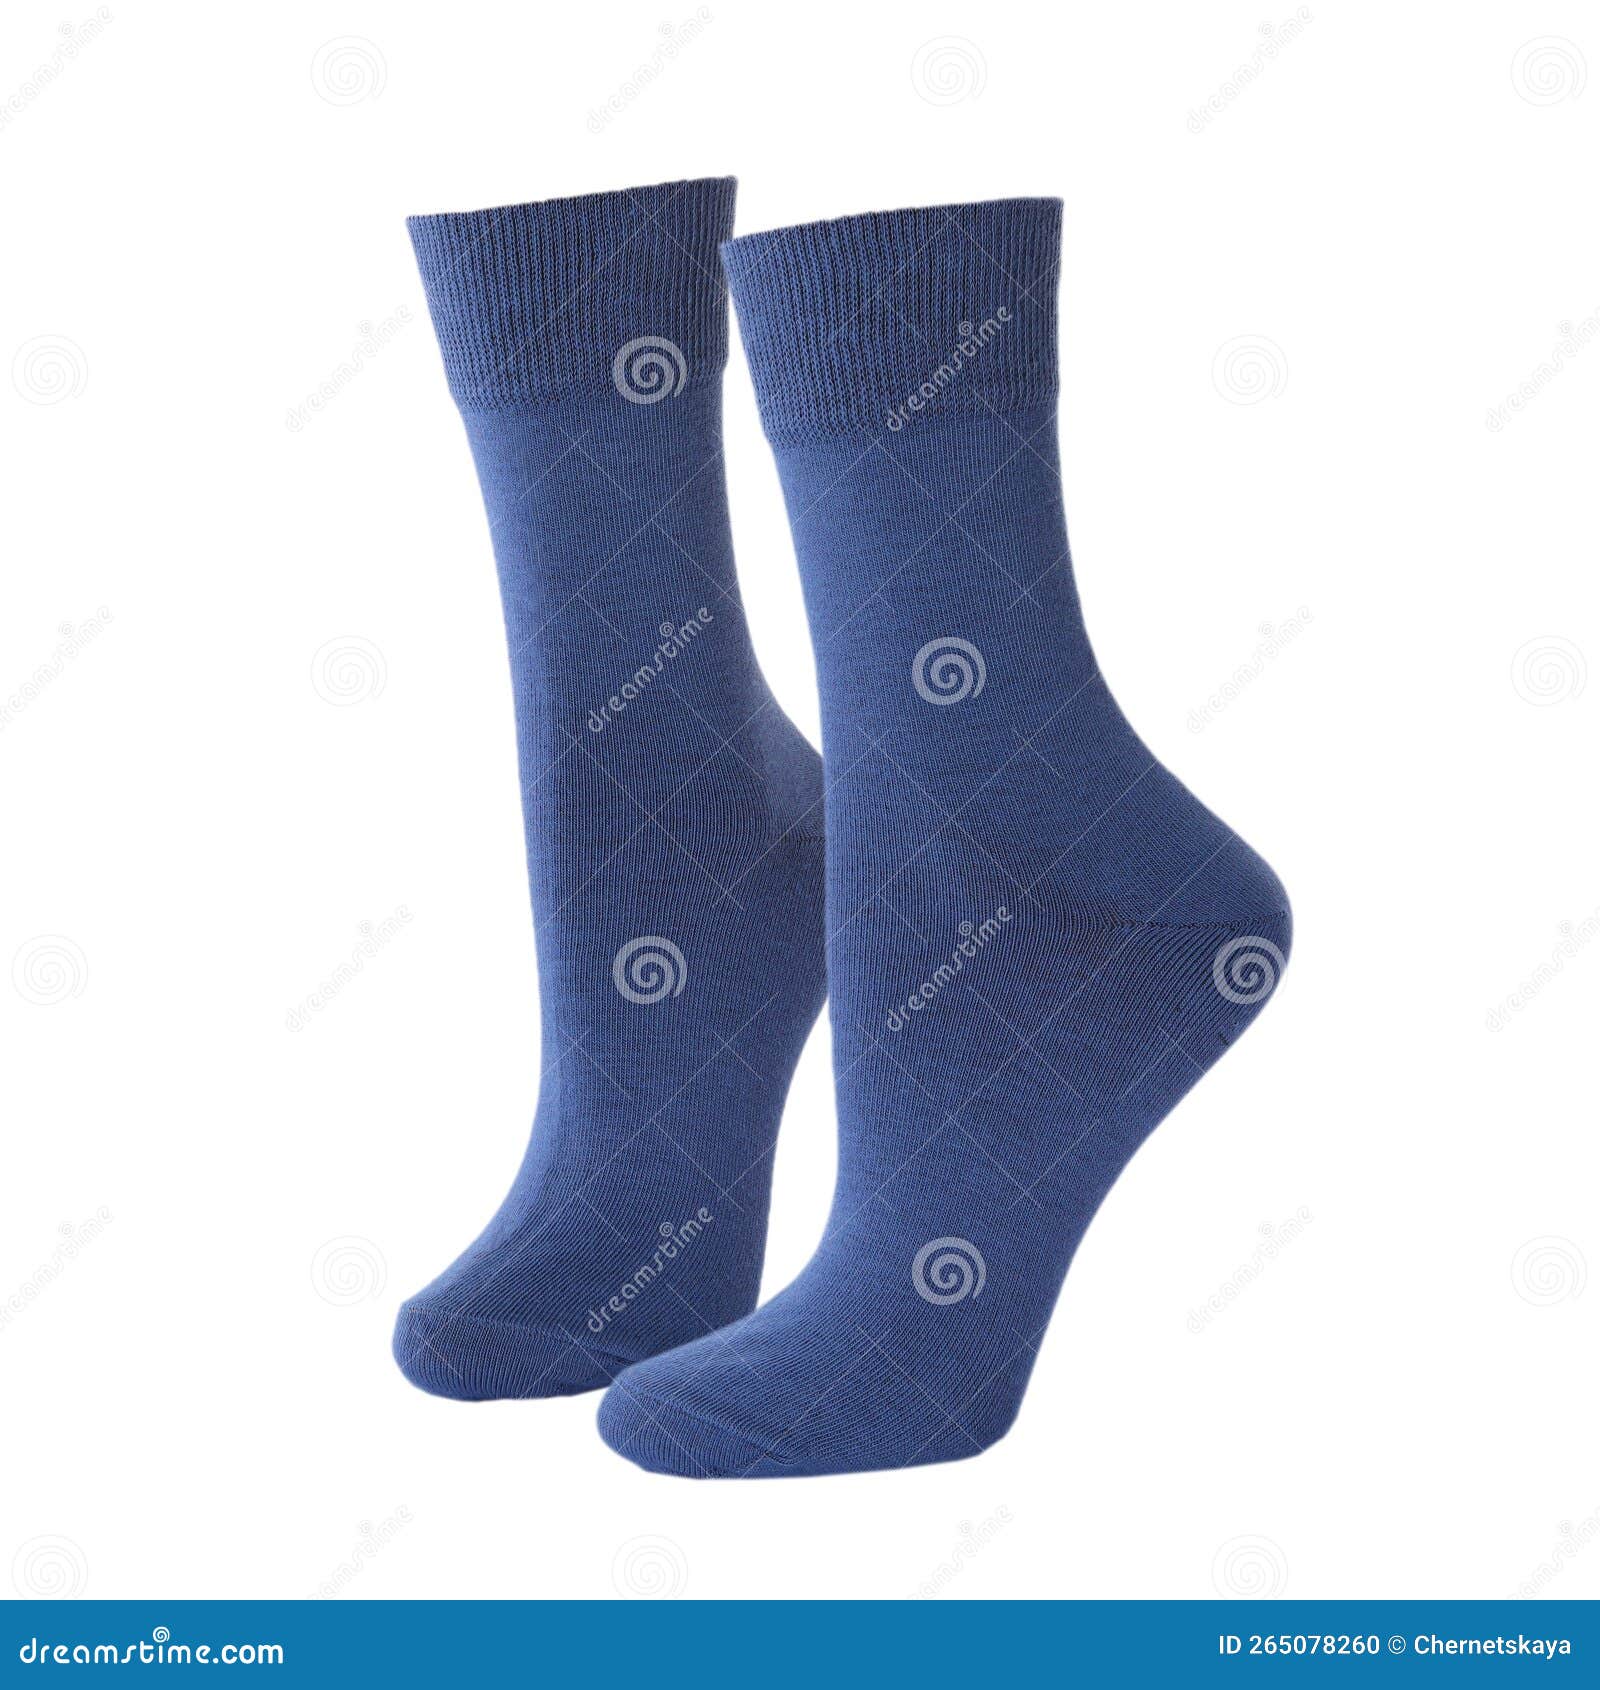 Pair of Dark Blue Socks Isolated on White Stock Photo - Image of clean ...